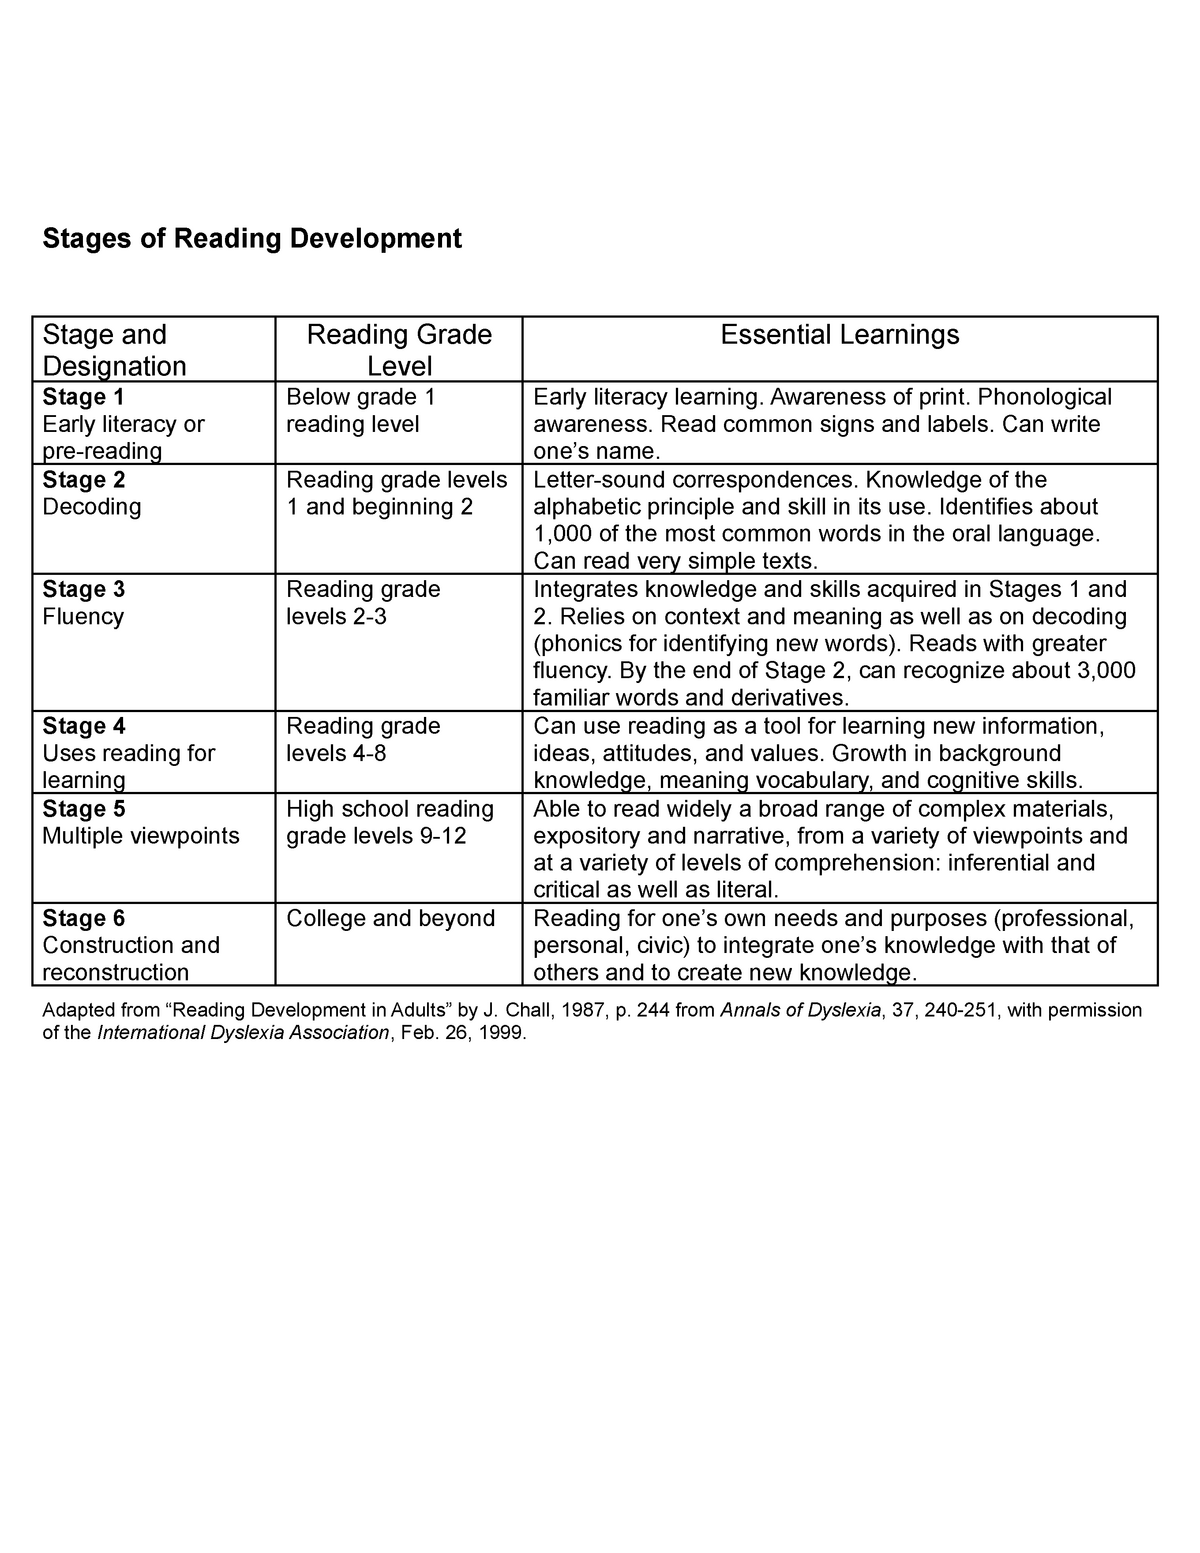 challs stages of reading development